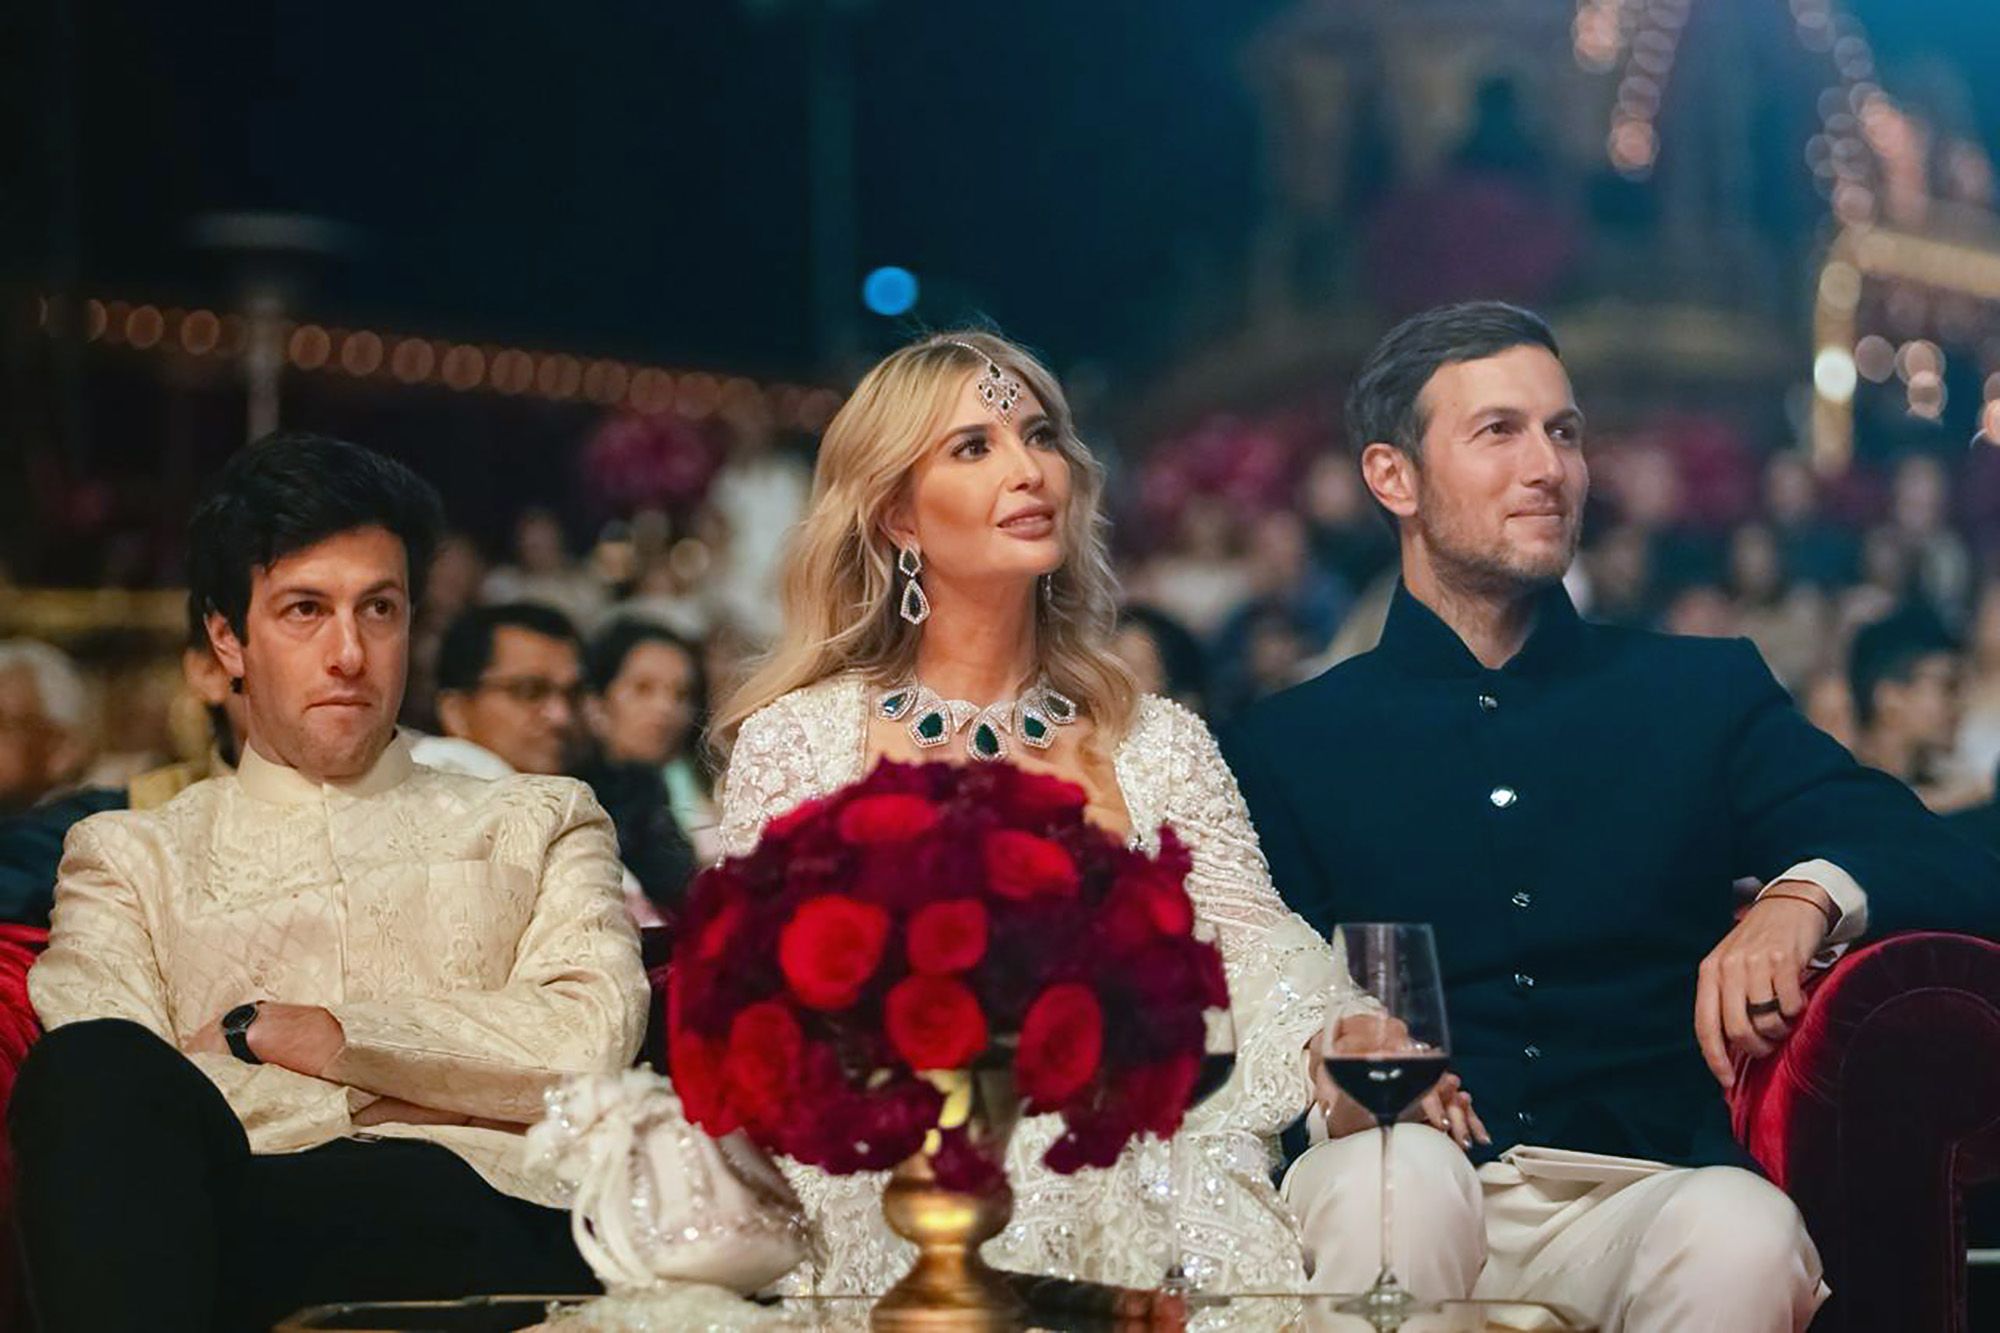 Ivanka Trump and her husband Jared Kushner (right) were seen attending the pre-wedding bash in Jamnagar, India this weekend.